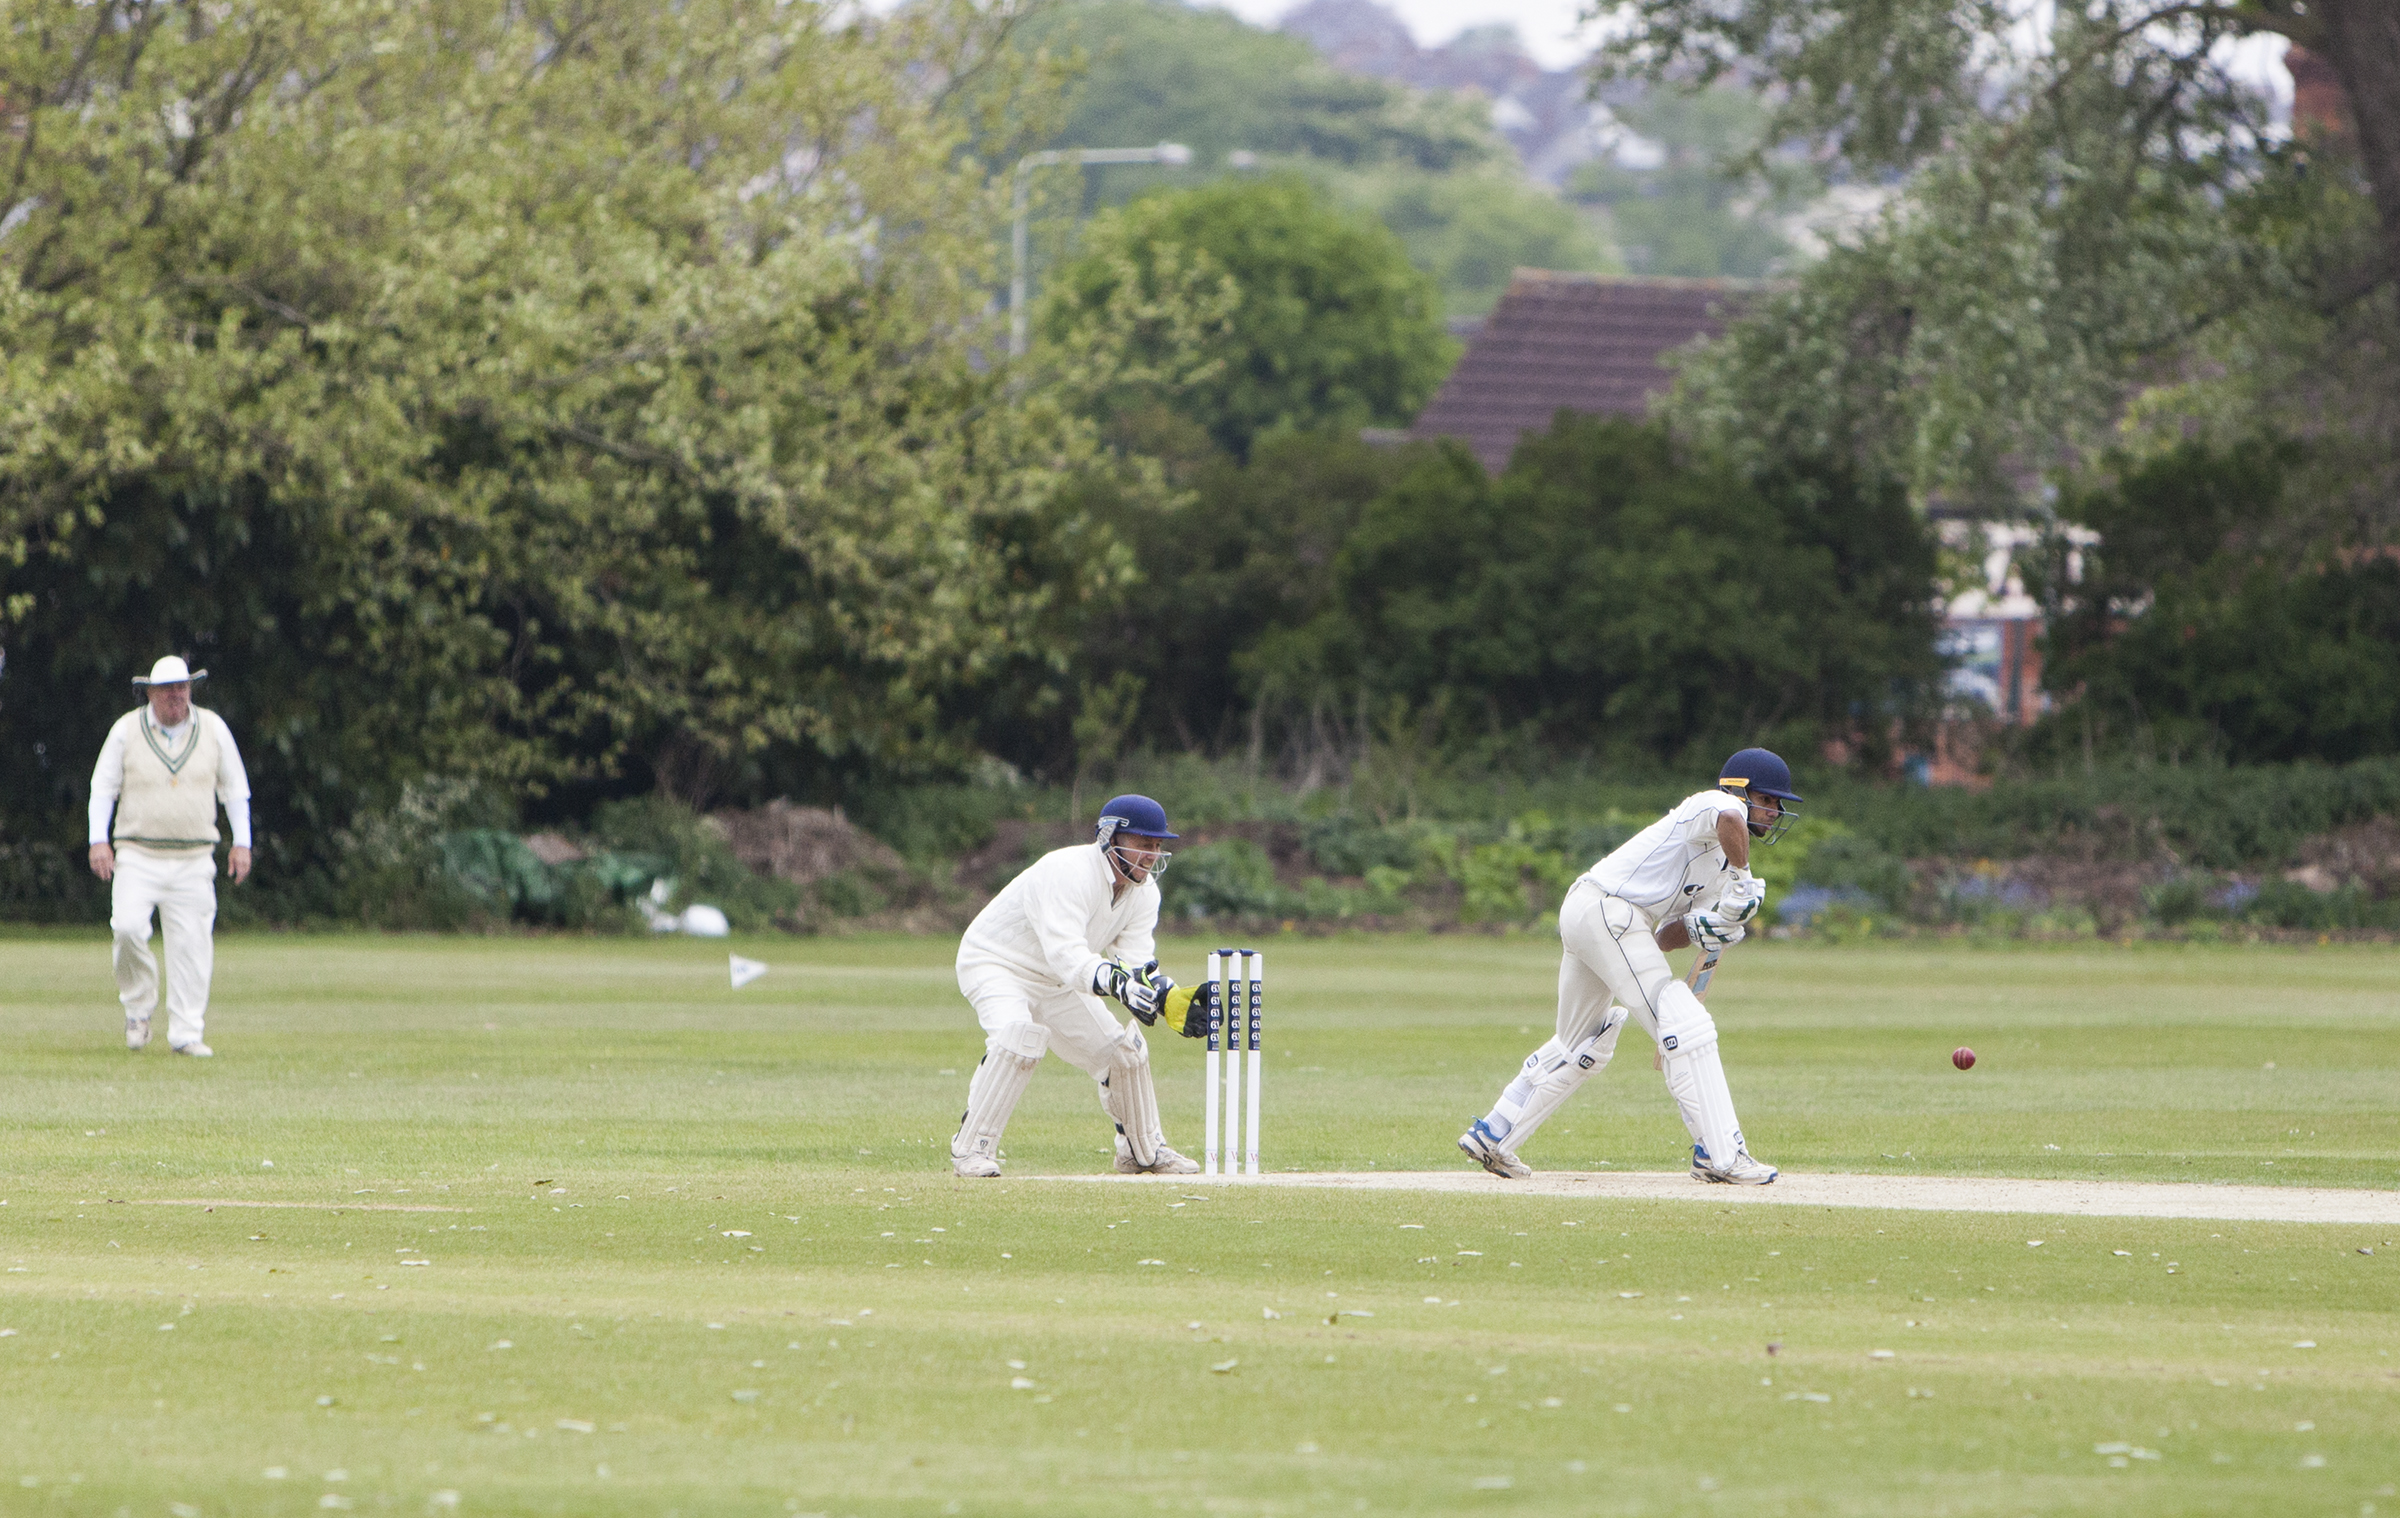 John Baden's knock helps Swindon 2nd to success in Wiltshire ... - Wiltshire Times